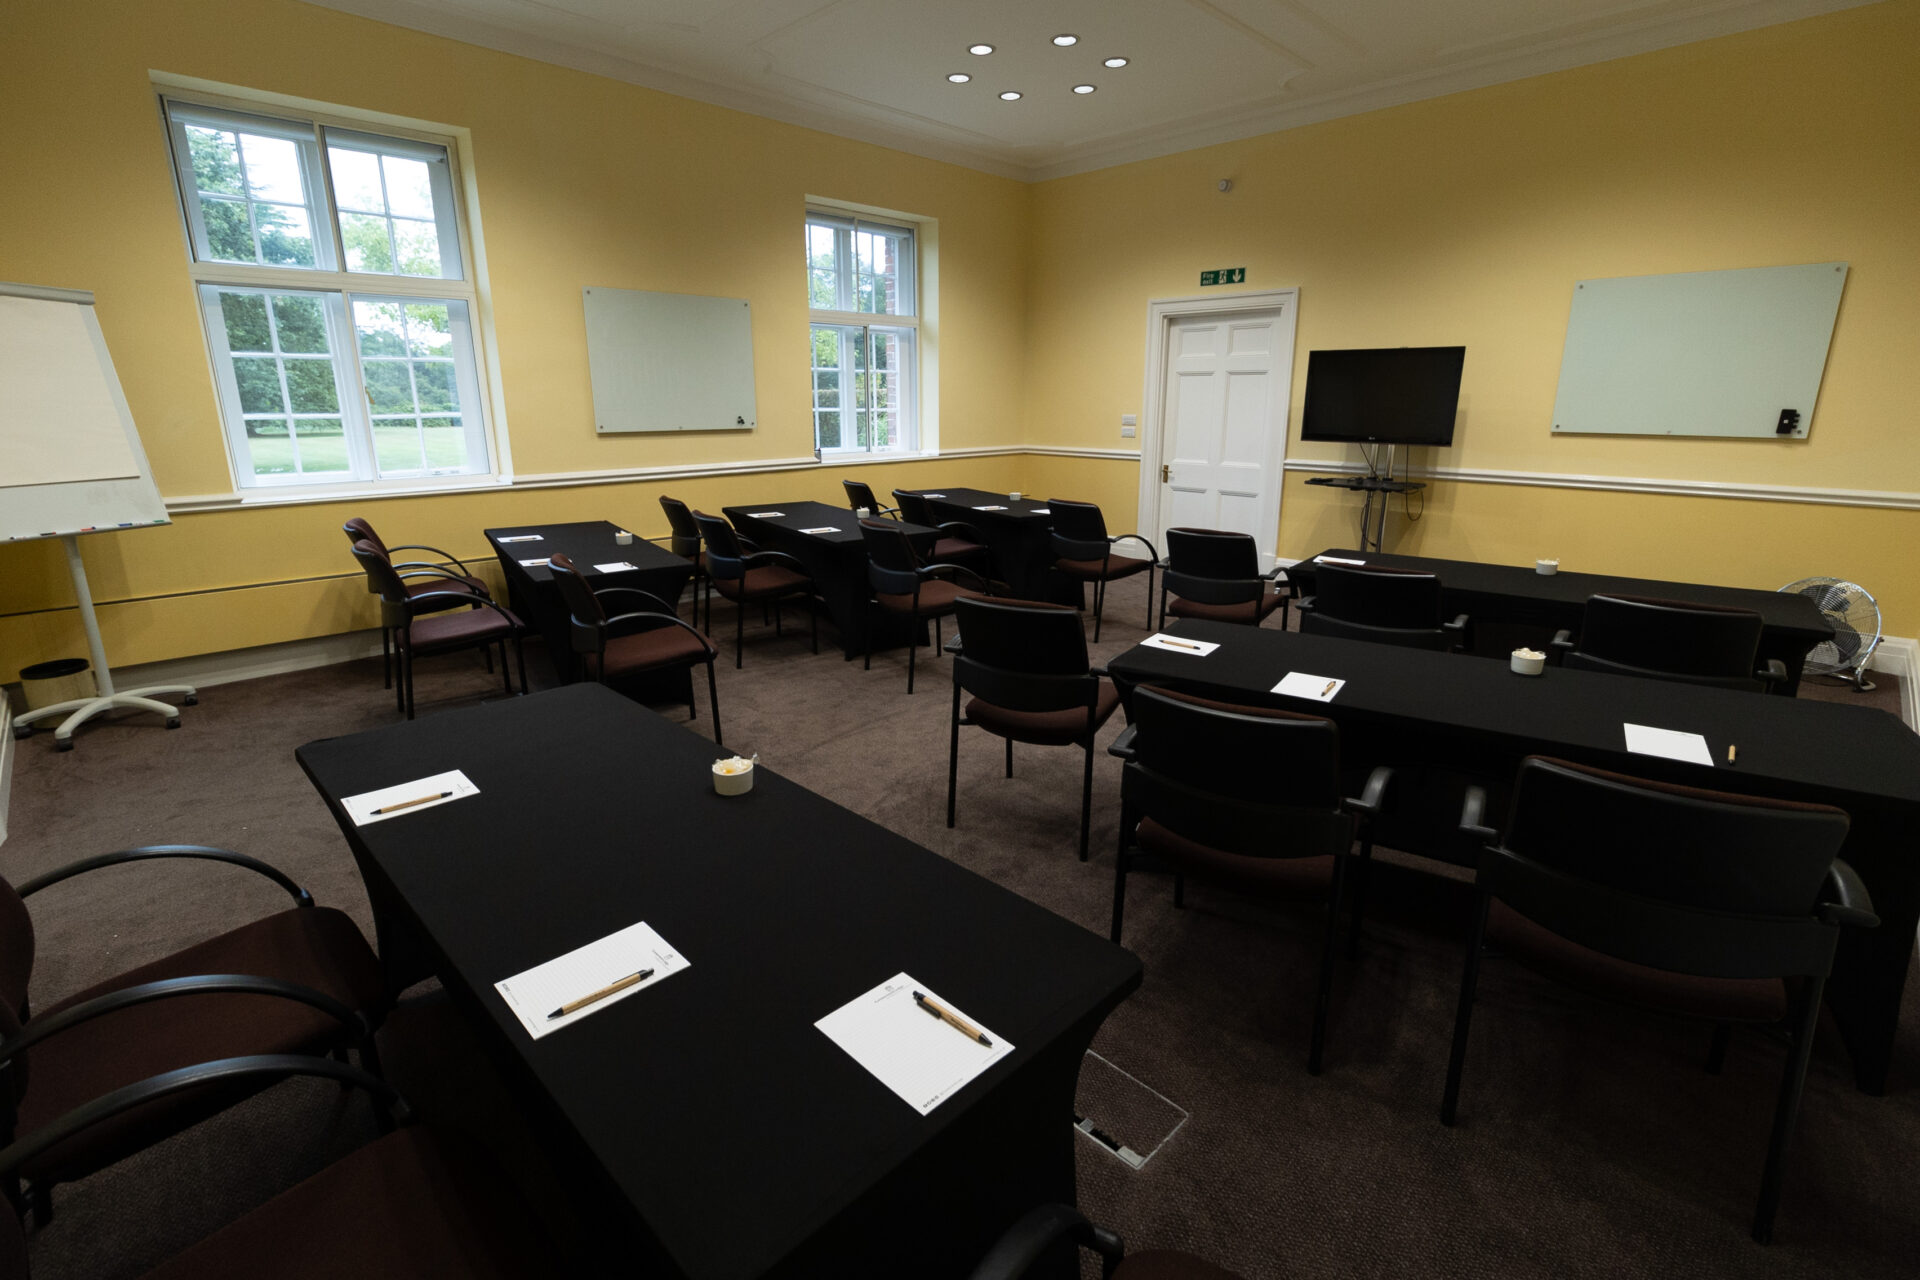 The Greening conference room, laid out in a cabaret style to accommodate up to 18 people.